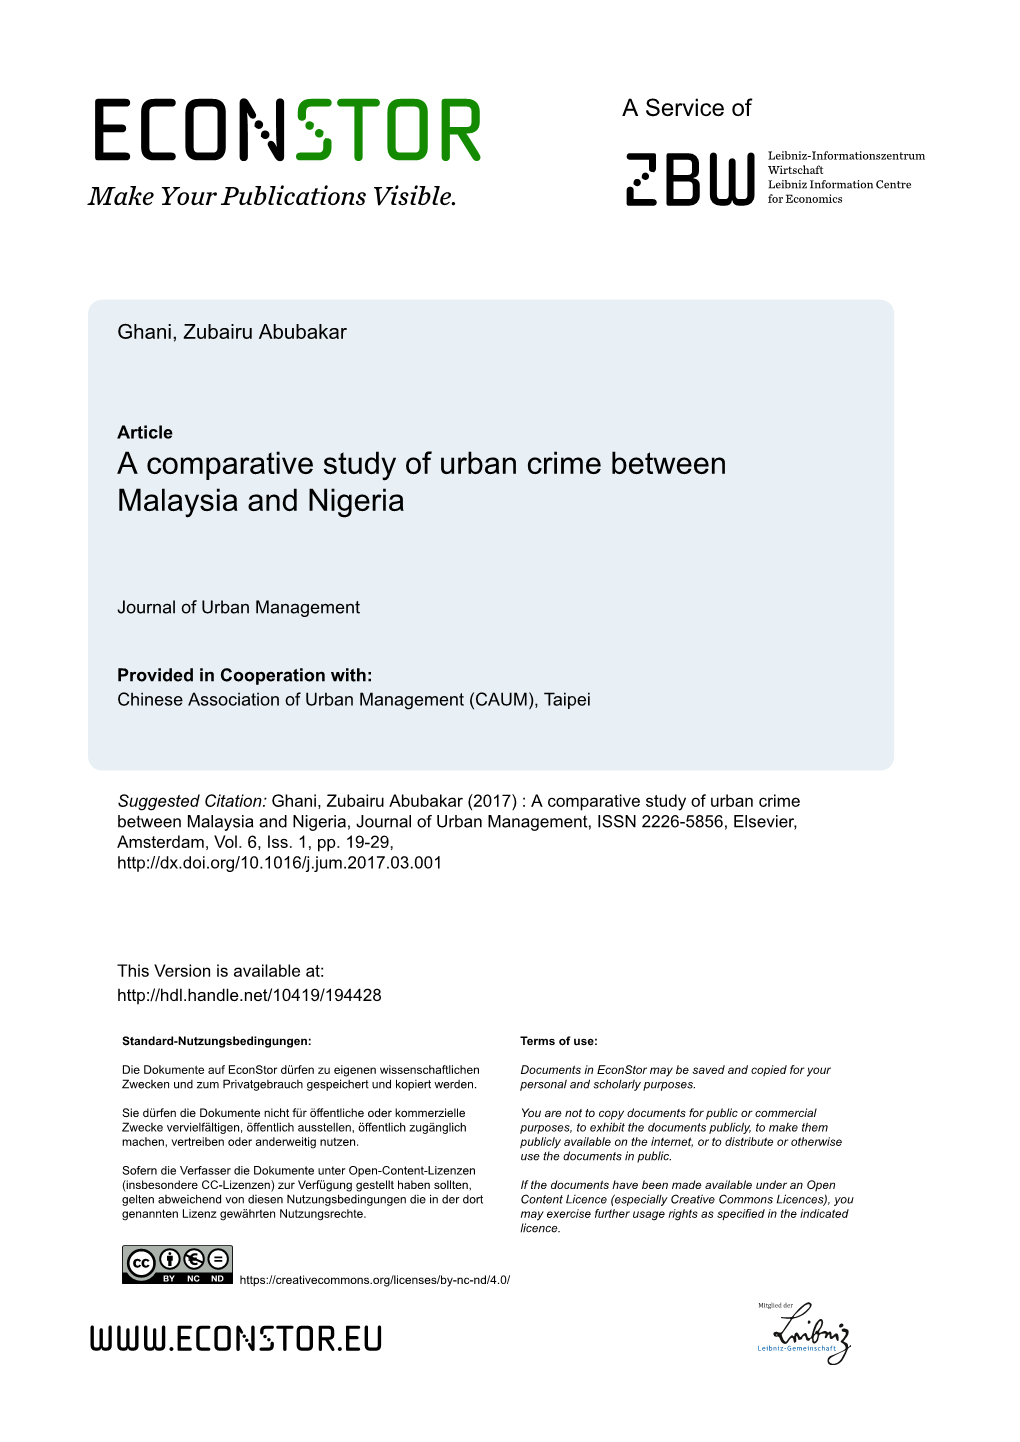 A Comparative Study of Urban Crime Between Malaysia and Nigeria